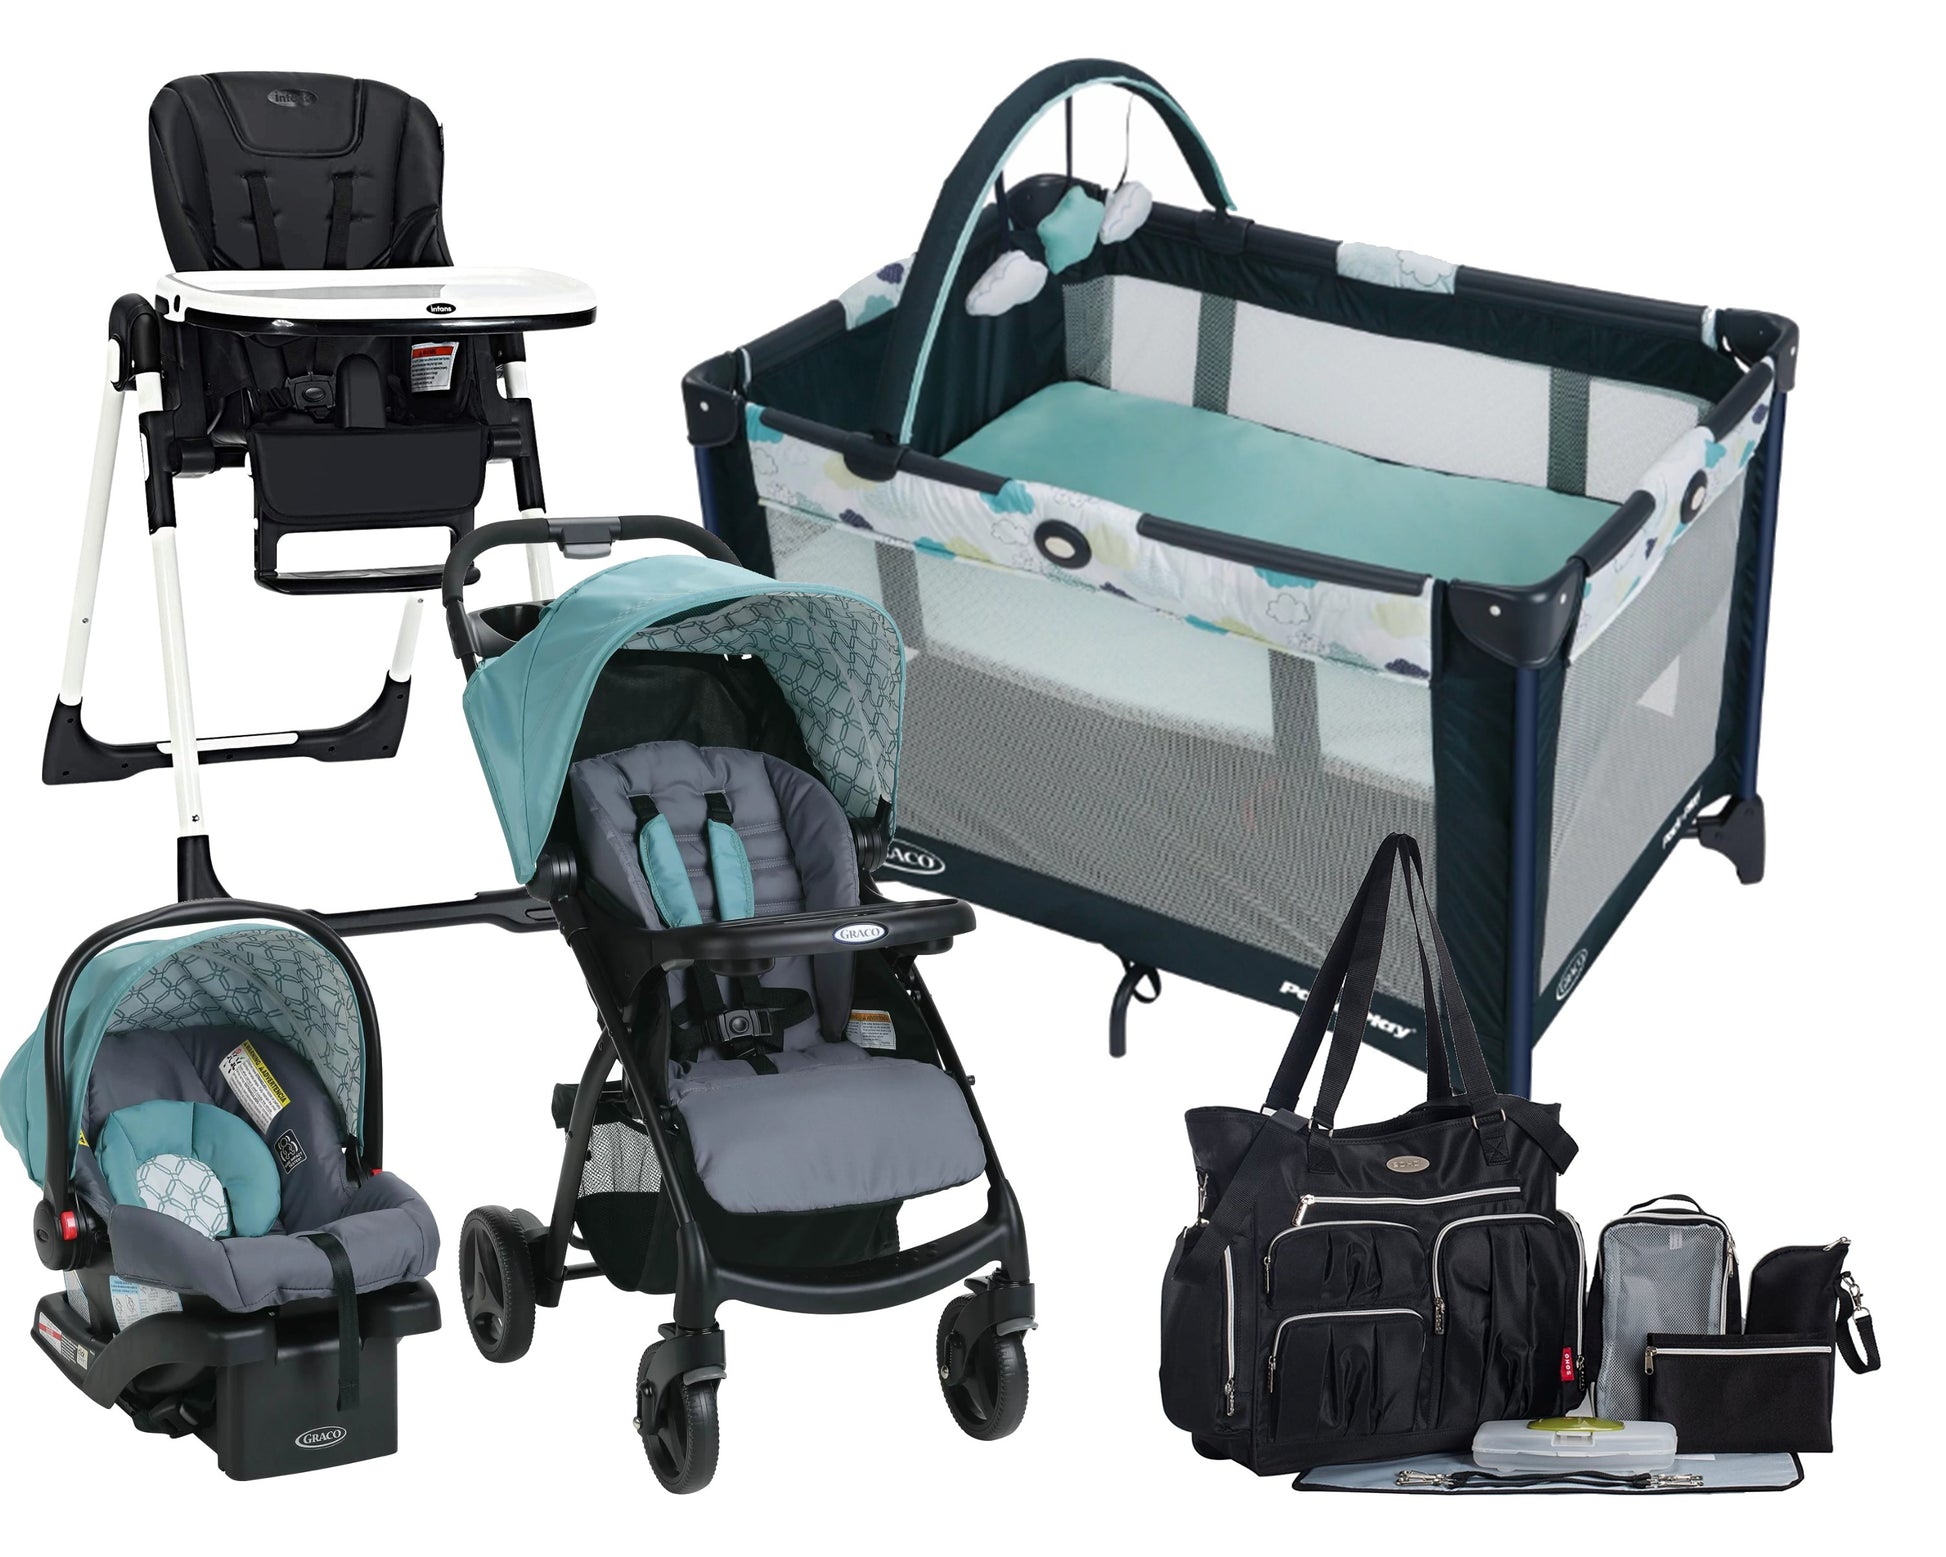 Infant Baby Stroller Travel System Combo with Car Seat Playard Nursery